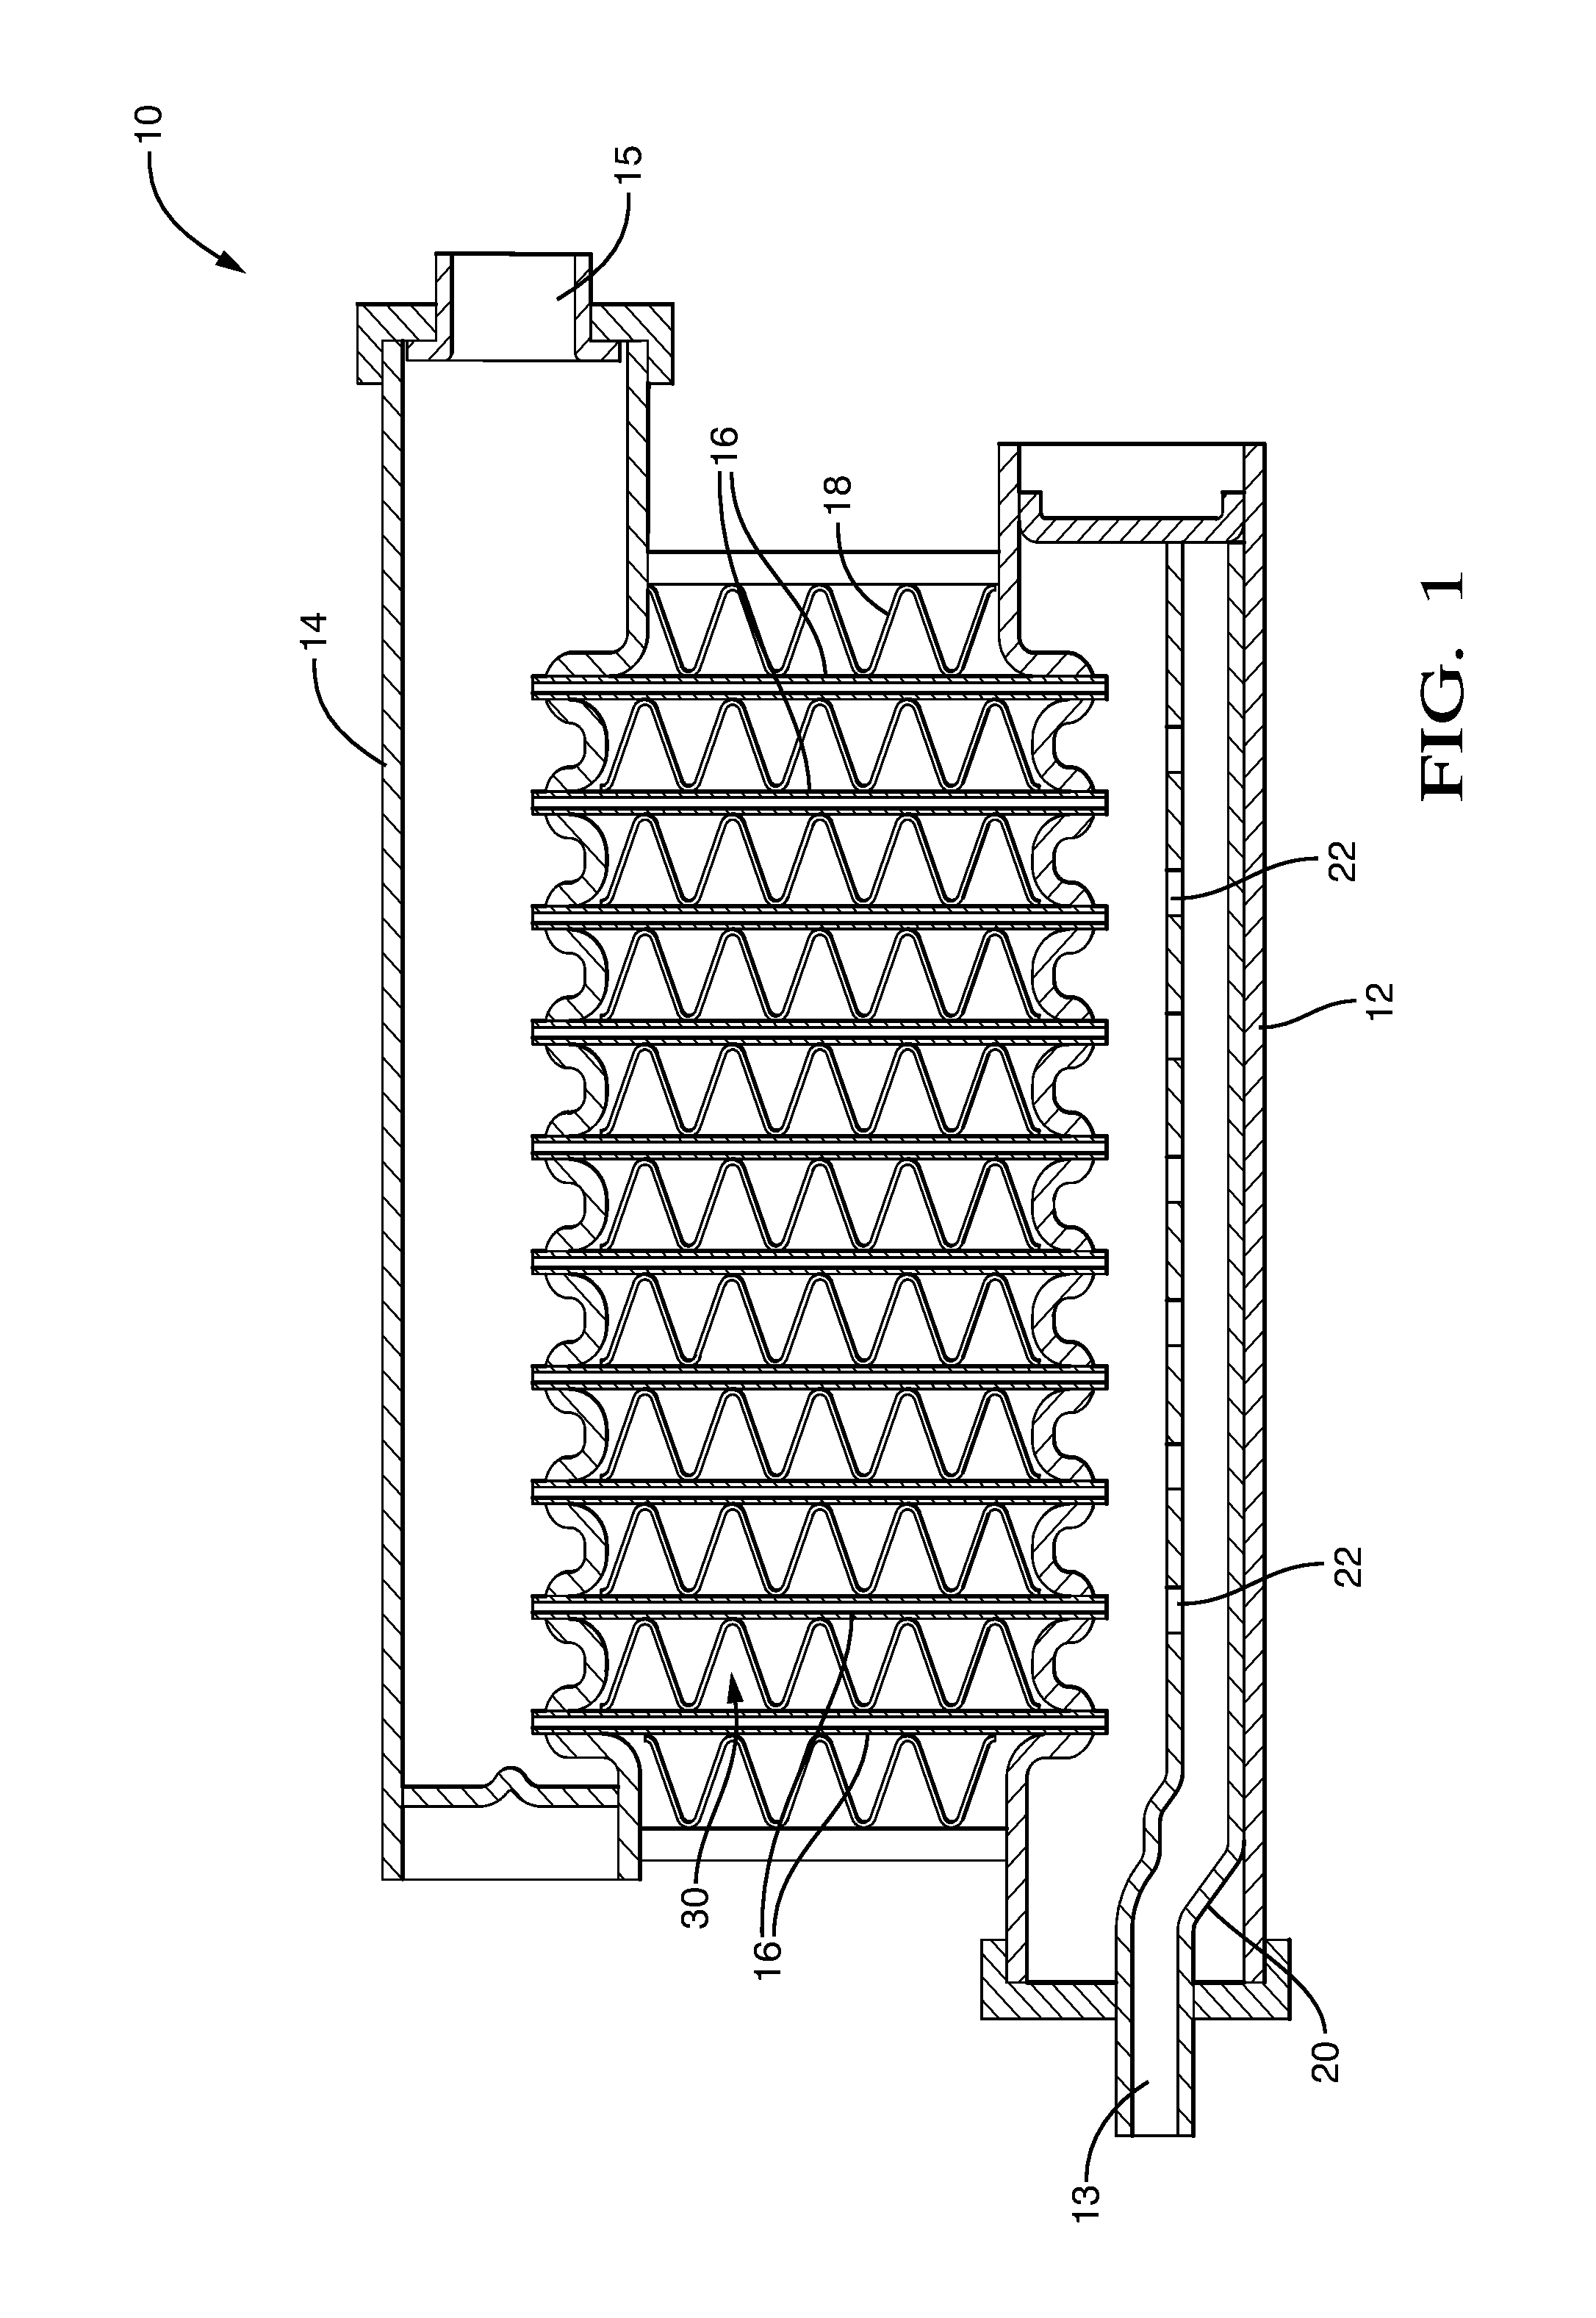 Heat exchanger having an inlet distributor and outlet collector